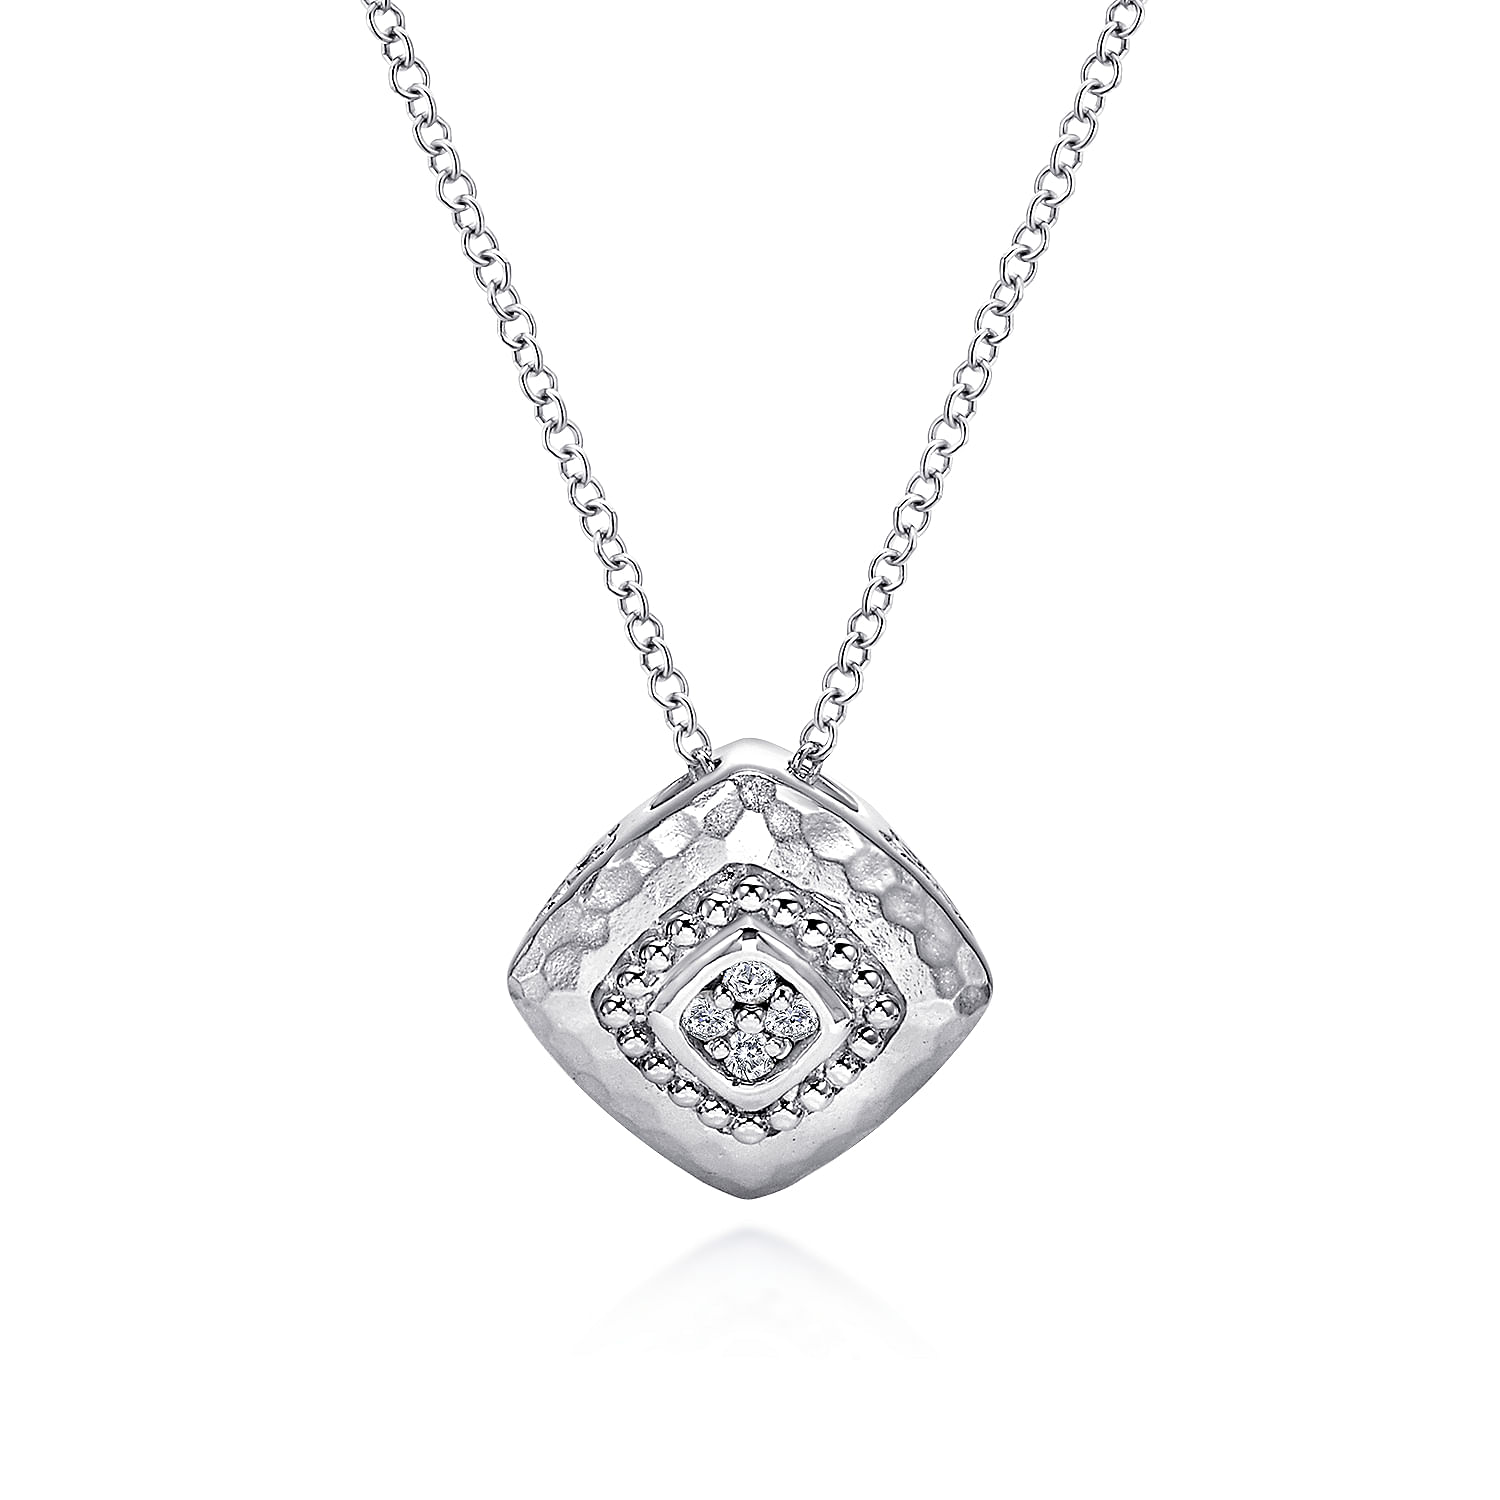 18 inch 925 Sterling Silver Hammered Pendant Necklace with Diamond